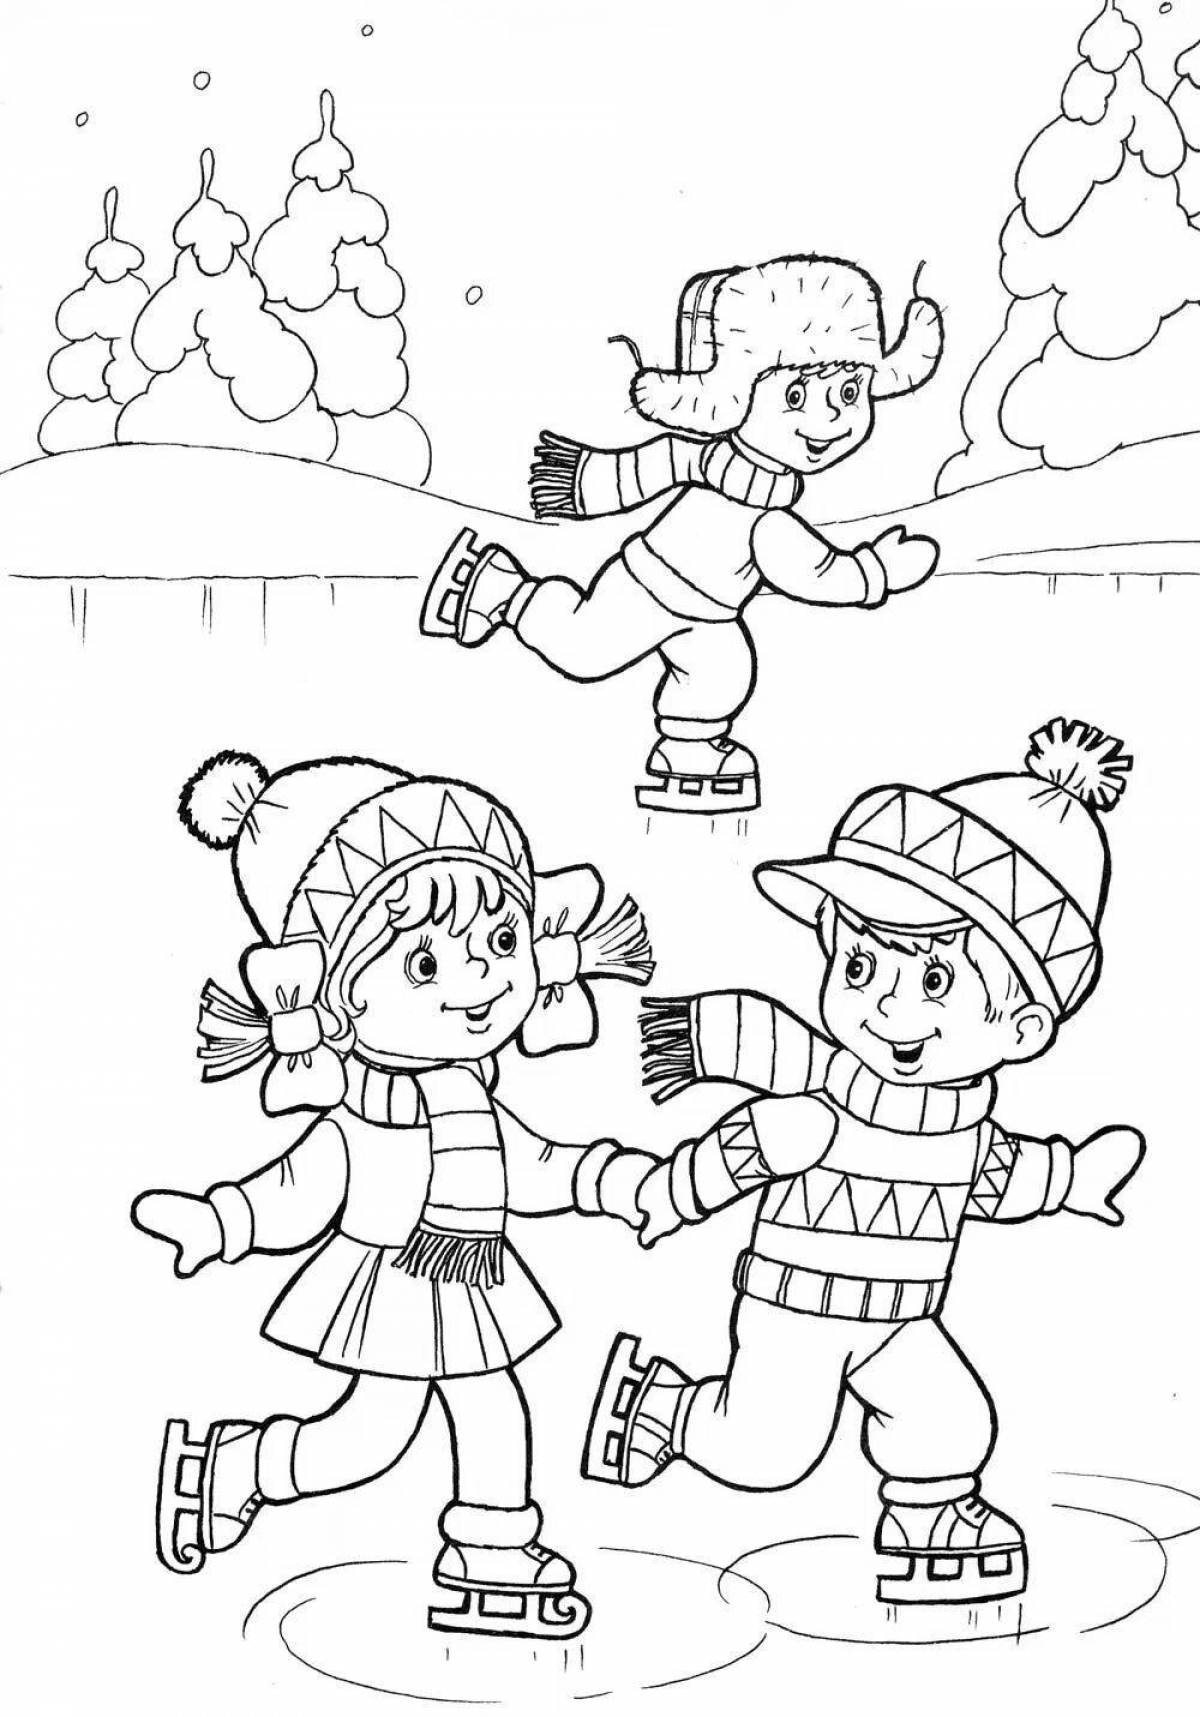 Glorious winter coloring book for kids 6-7 years old